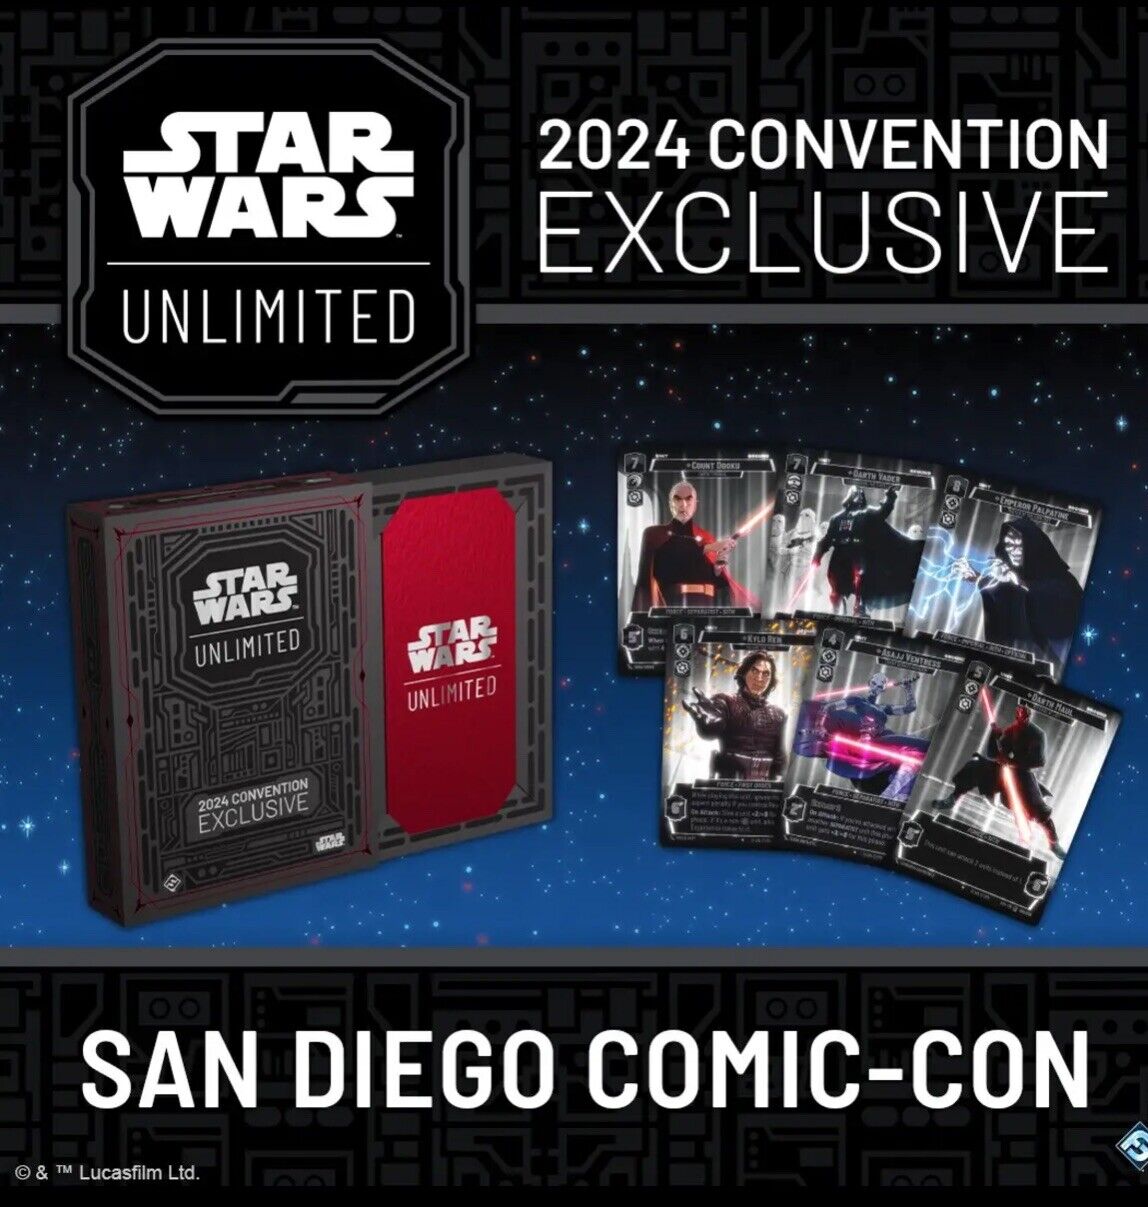 STAR WARS UNLIMITED SDCC 2024 Convention Exclusive LE